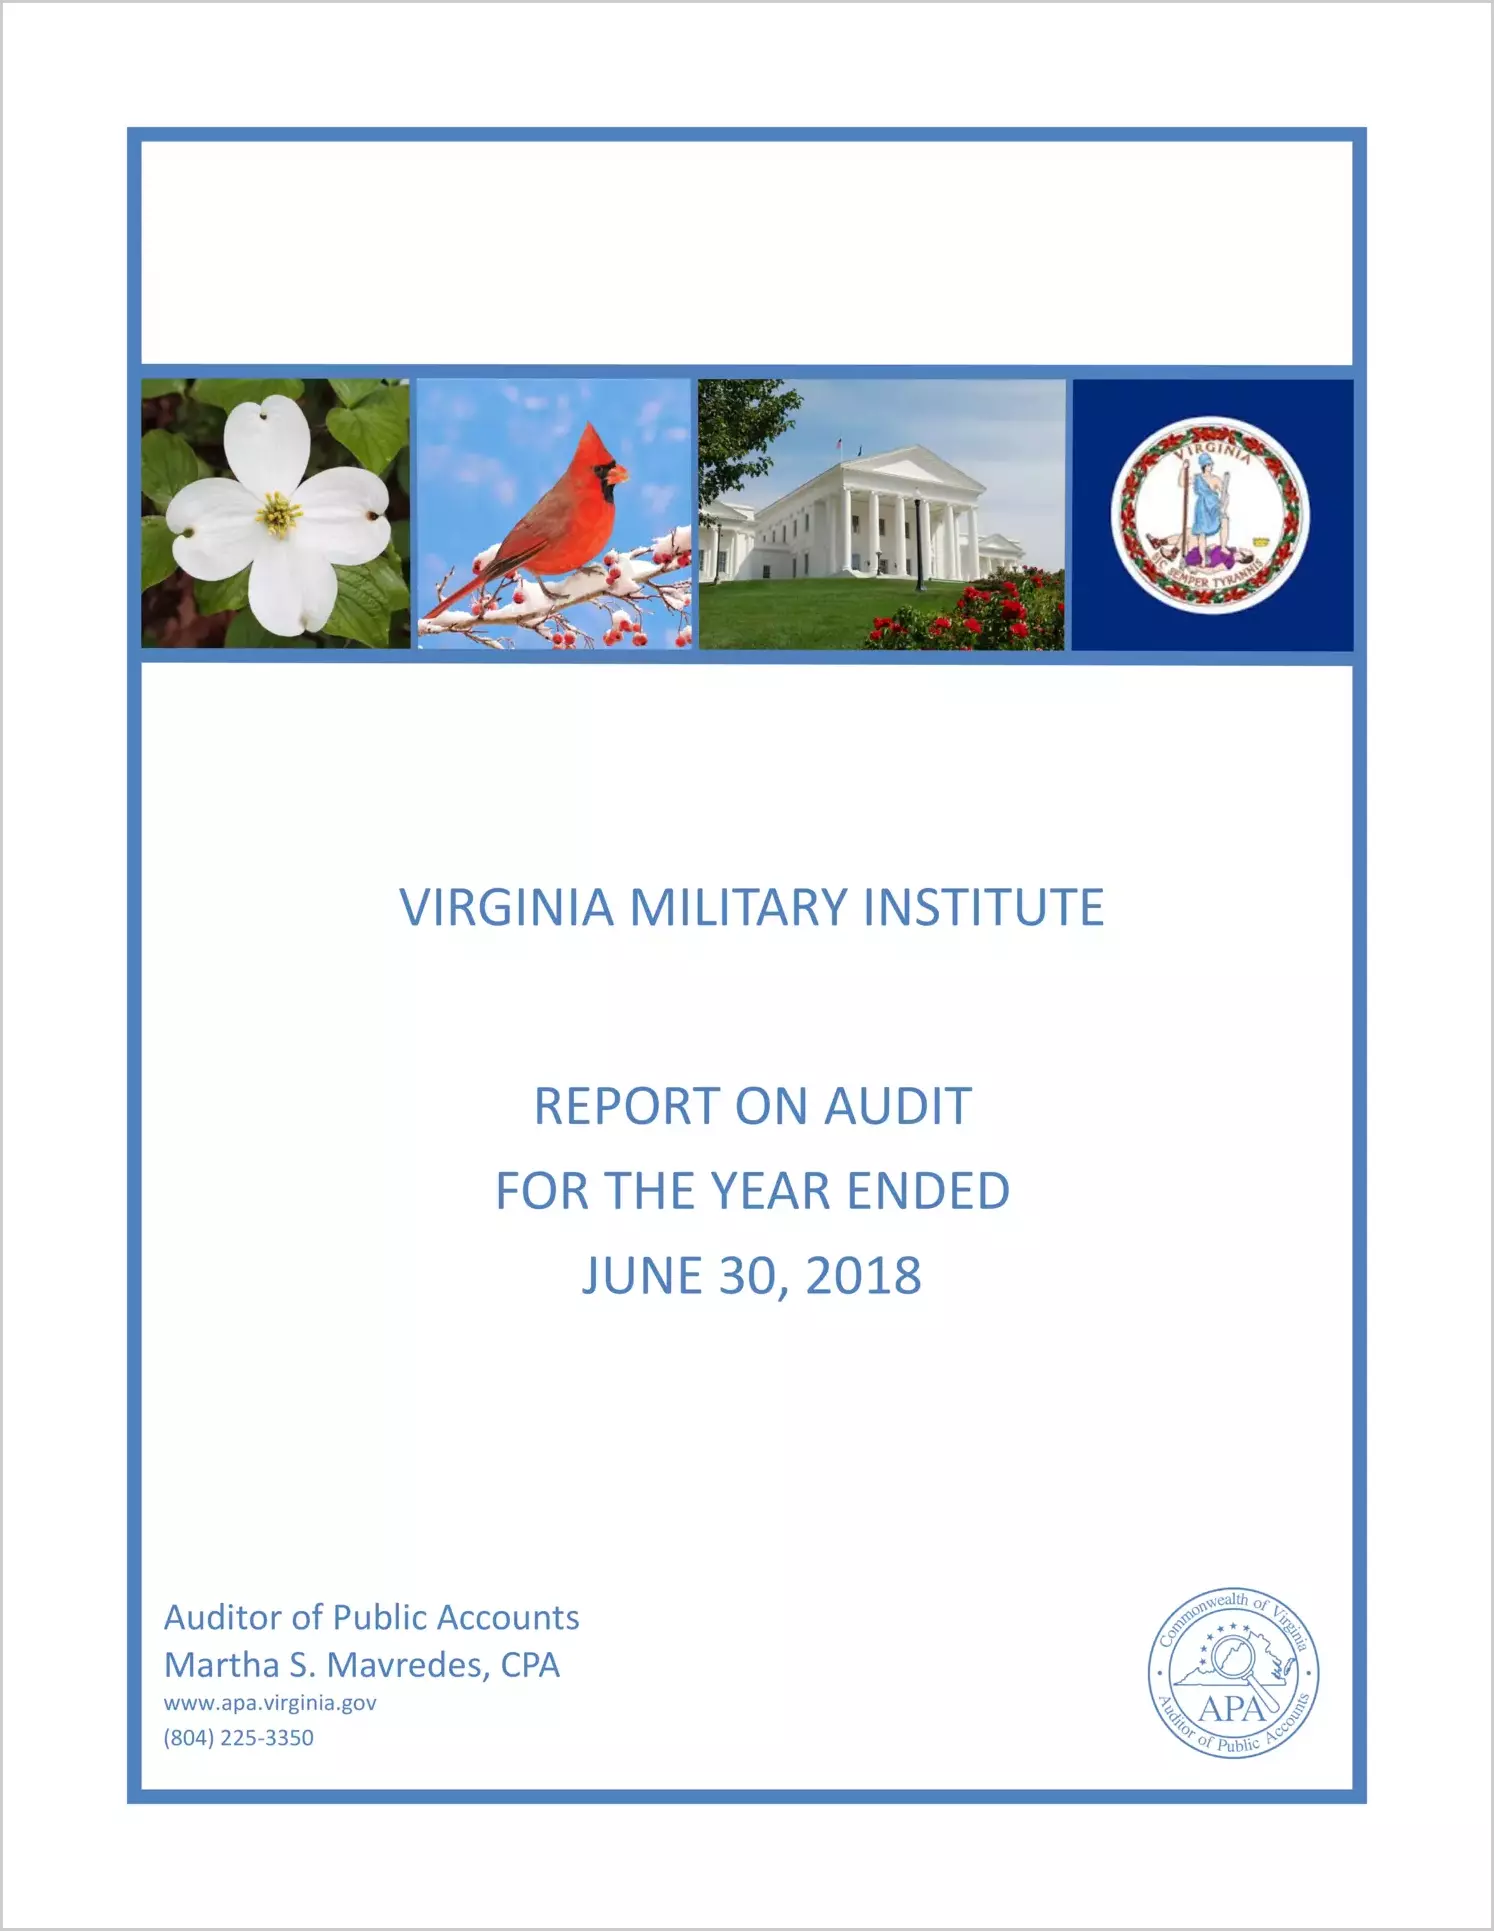 Virginia Military Institute for the year ended June 30, 2018